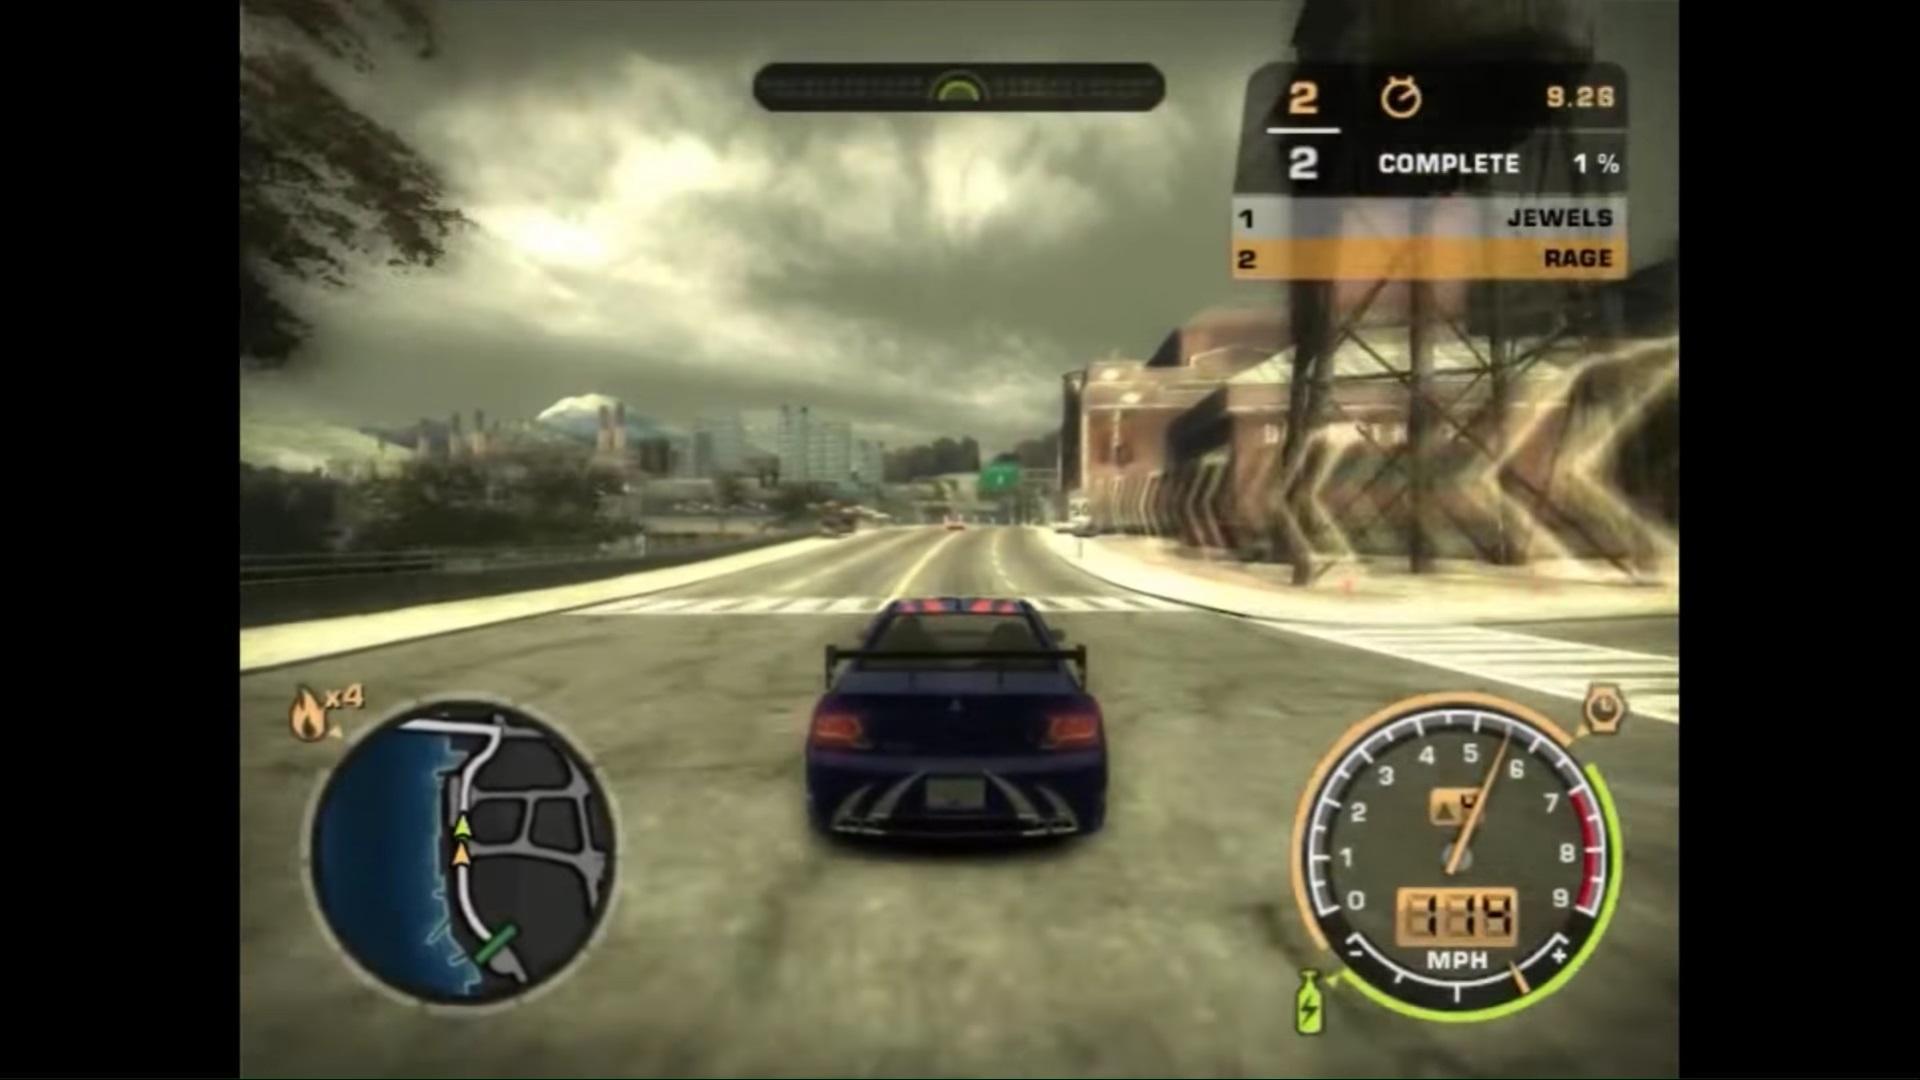 Need for Speed most wanted Android. Need for Speed most wanted на андроид. Кэш nfs на андроид